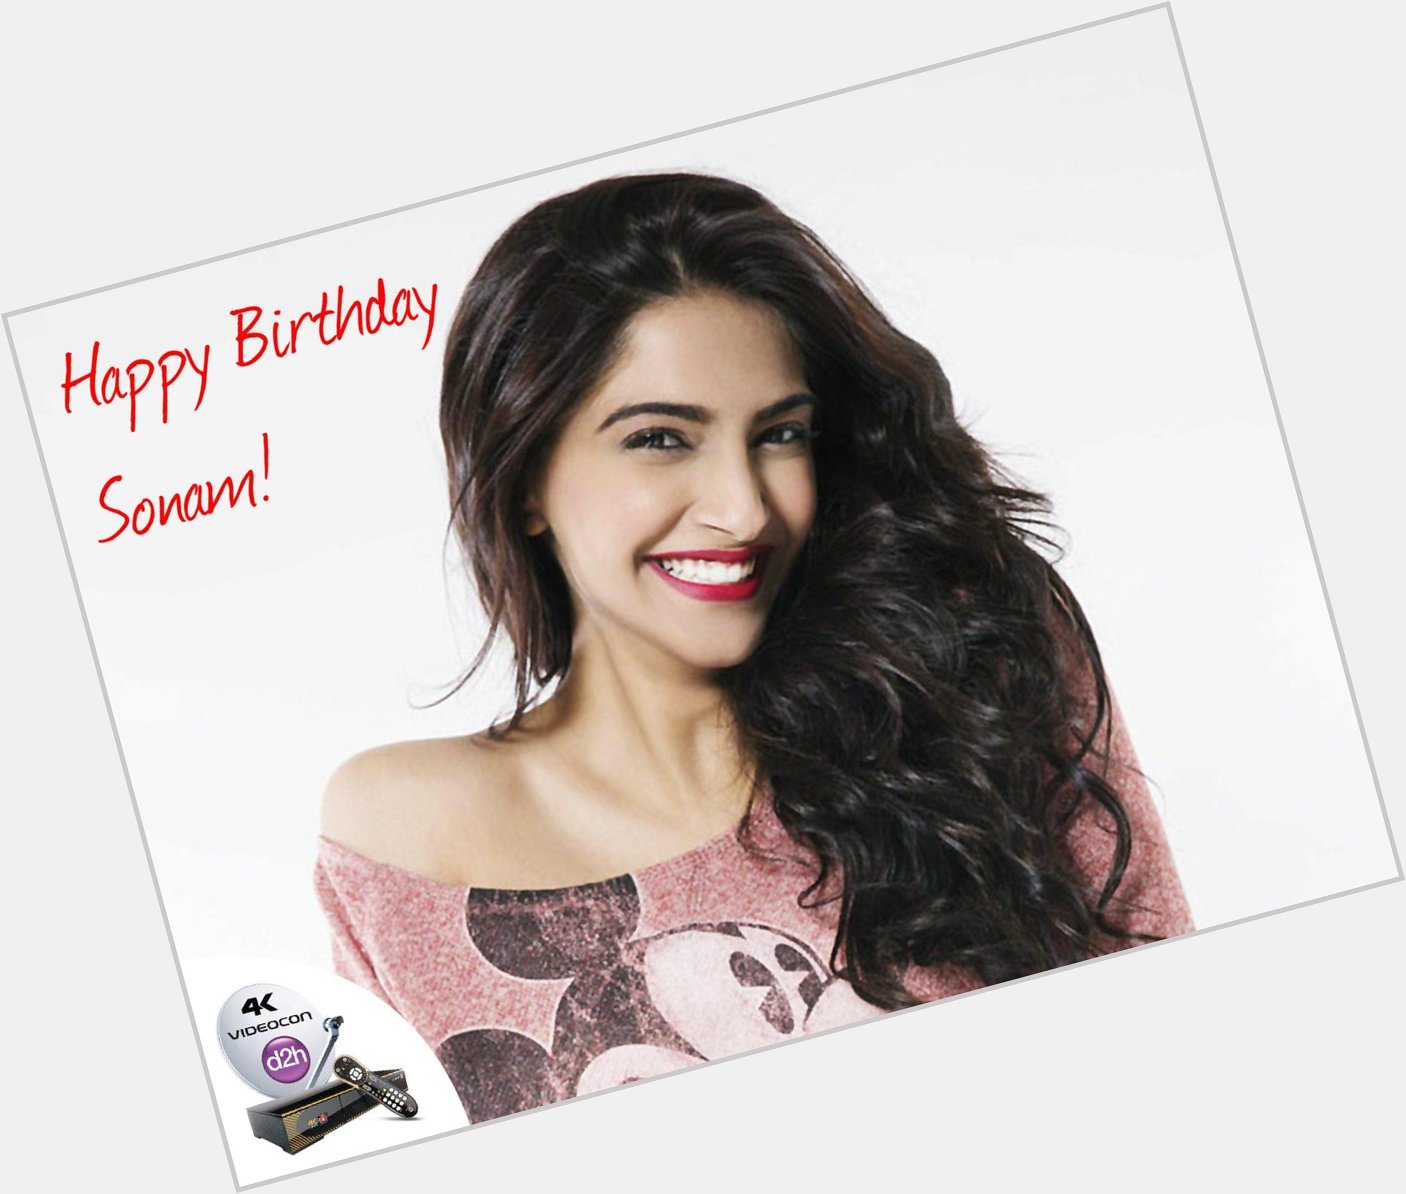 Happy Birthday Sonam Kapoor!
Join us in wishing the Khoobsurat star all the luck in the world. 